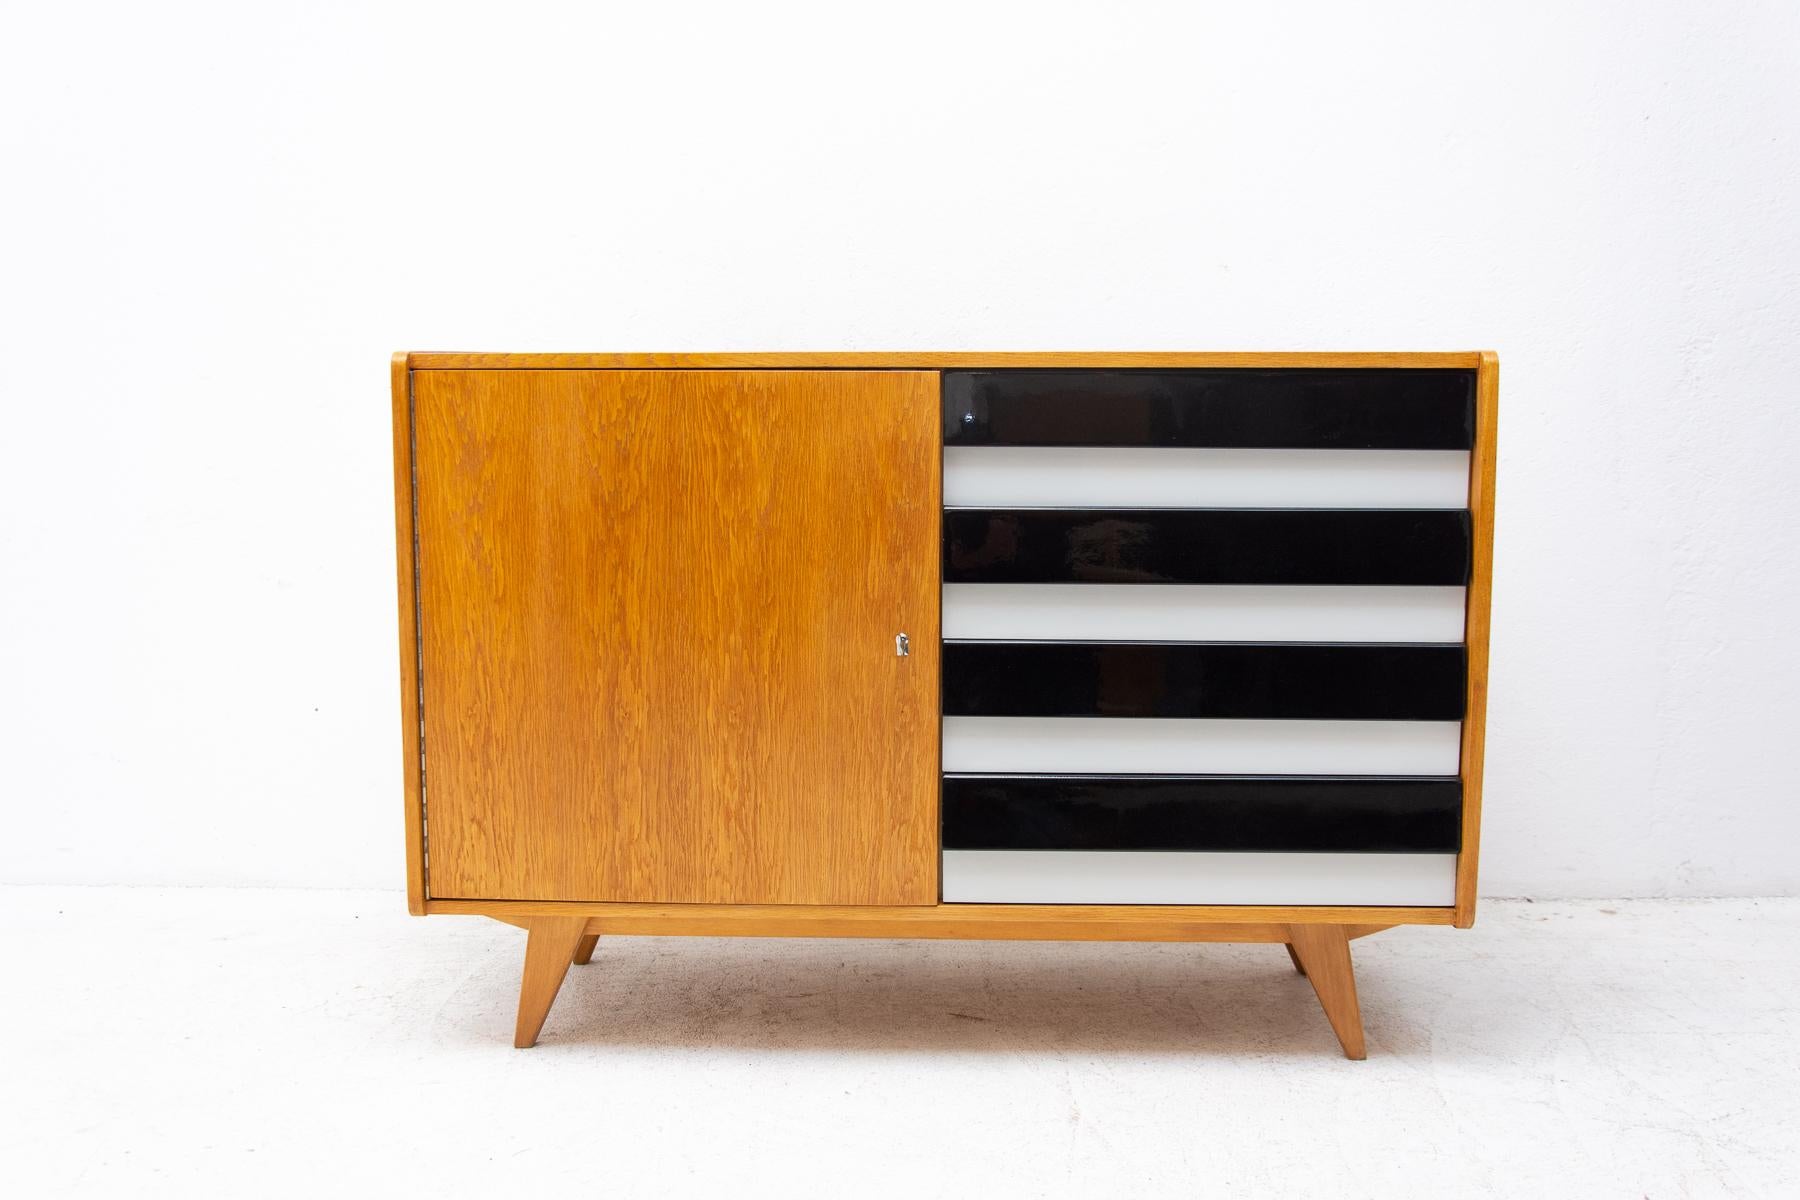 Midcentury chest of drawers, model no. U-458, designed by Jiri Jiroutek. It was made in the 1960´s and produced by “Interier Praha”. This model associated with world-renowned EXPO 58- “Brussels period”. It´s made of beech wood and plywood. The chest